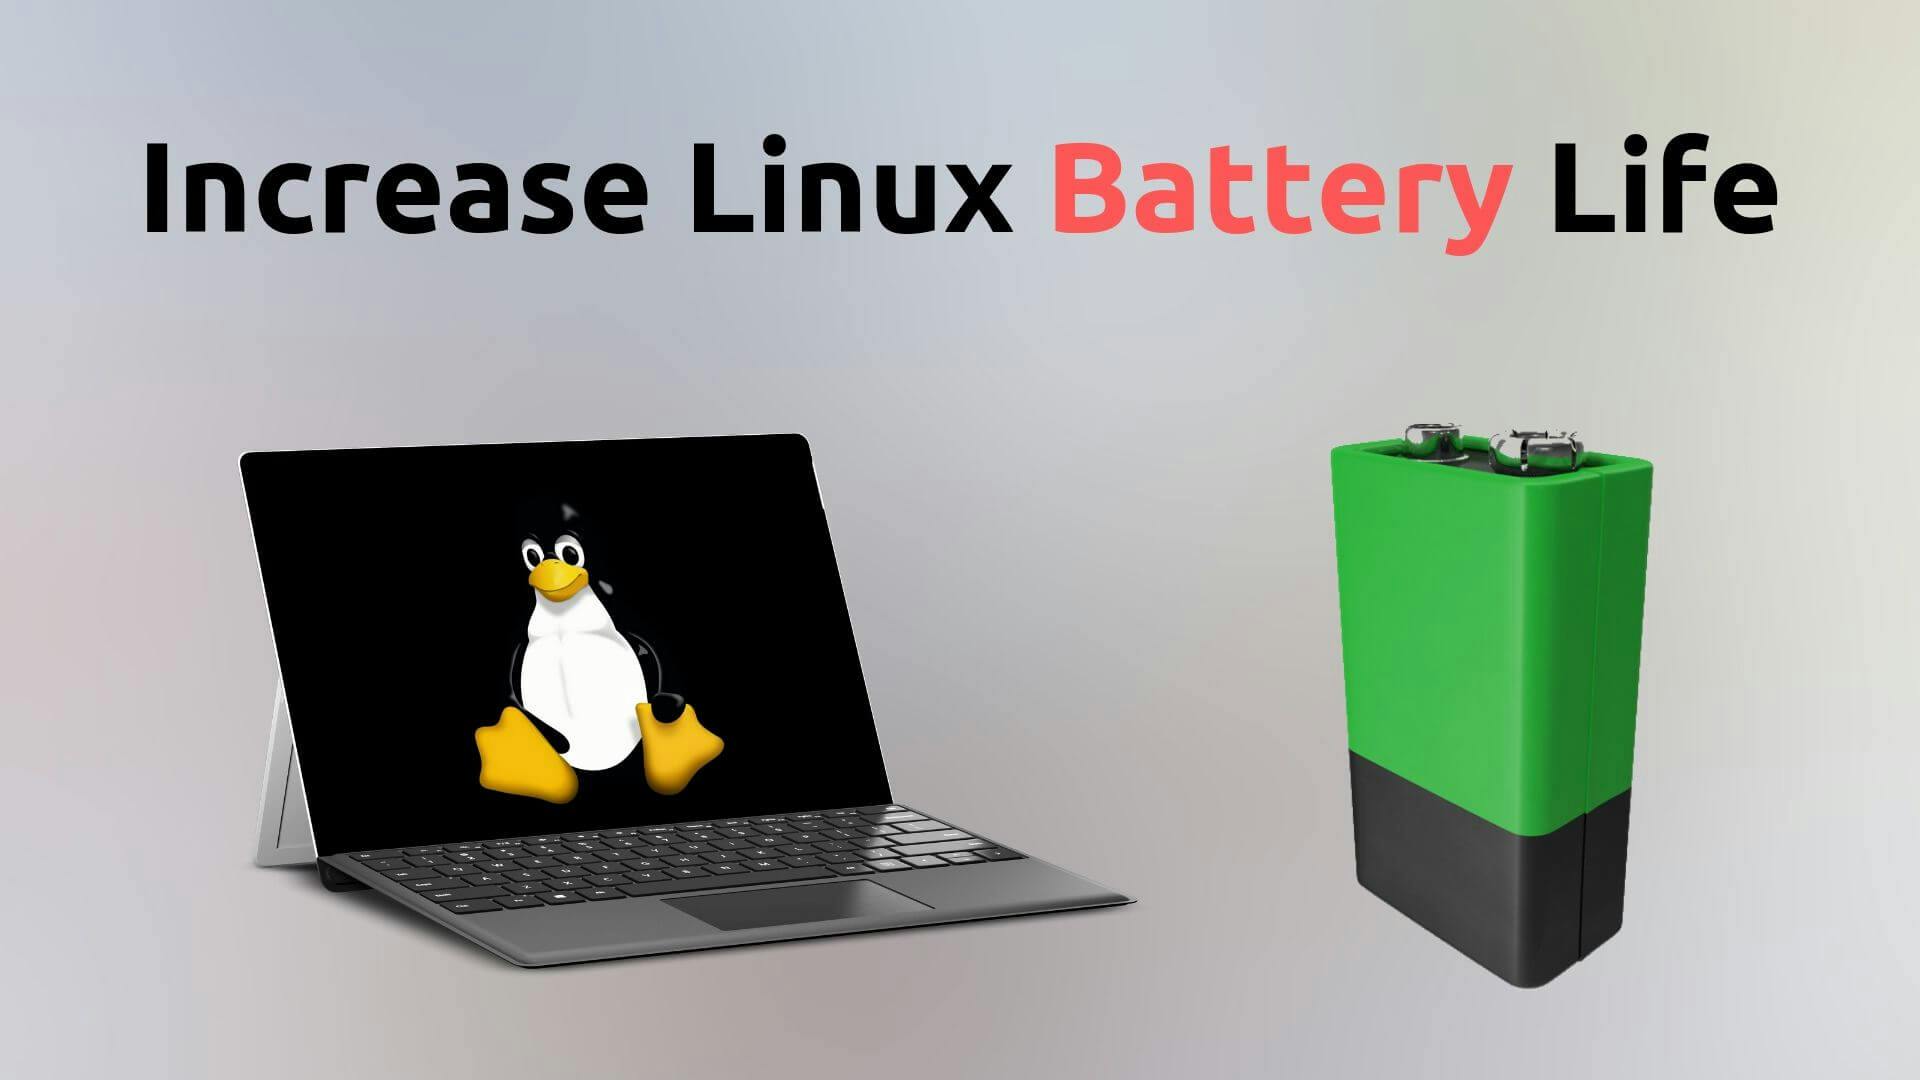 linux laptop with green battery life